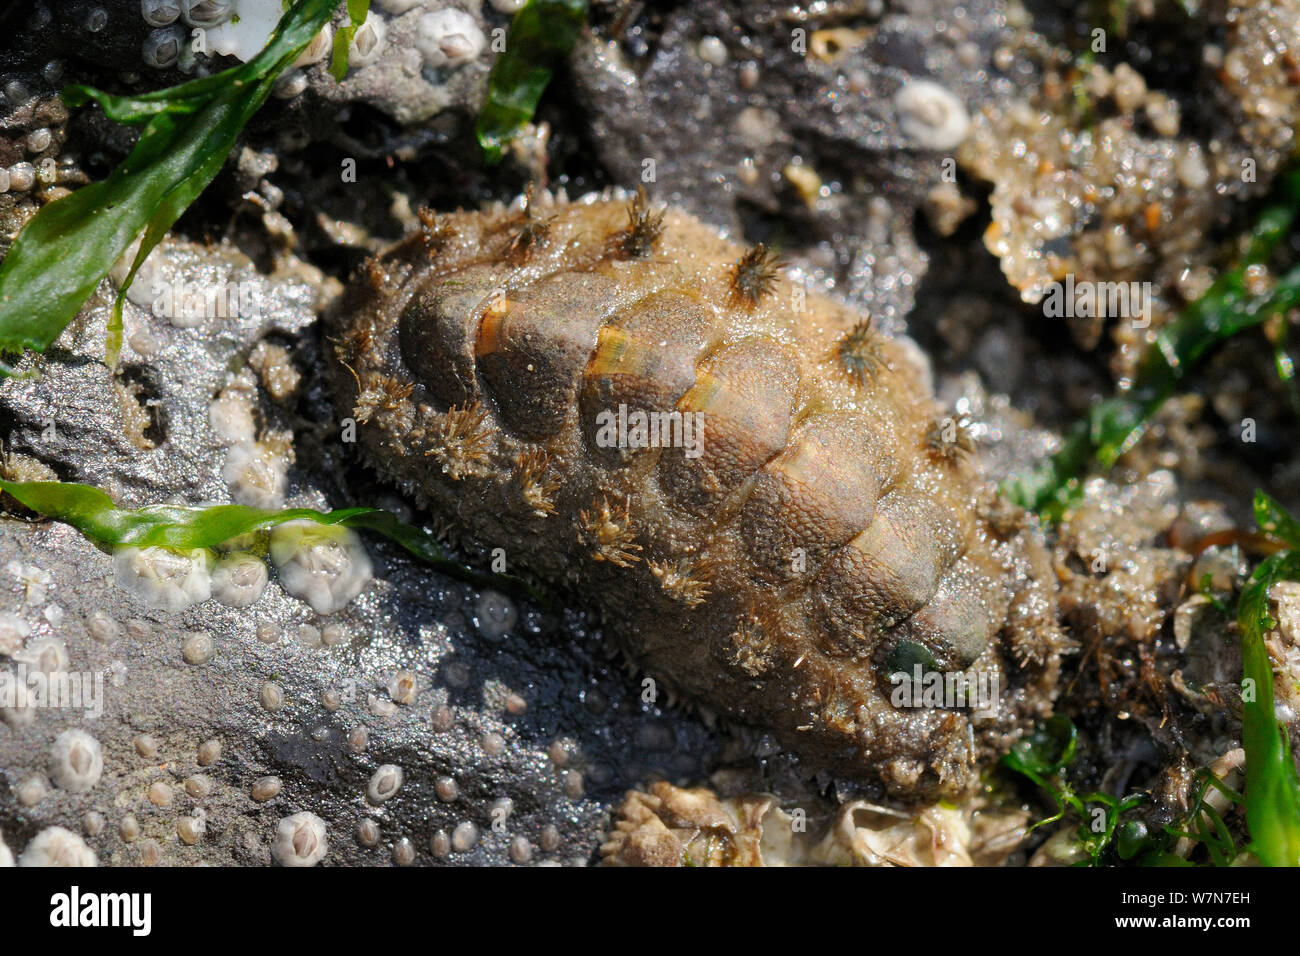 Bristled chiton (Acanthochitona crinitus) attached to rocks exposed at low tide, Rhossili, The Gower Peninsula, UK, July. Stock Photo